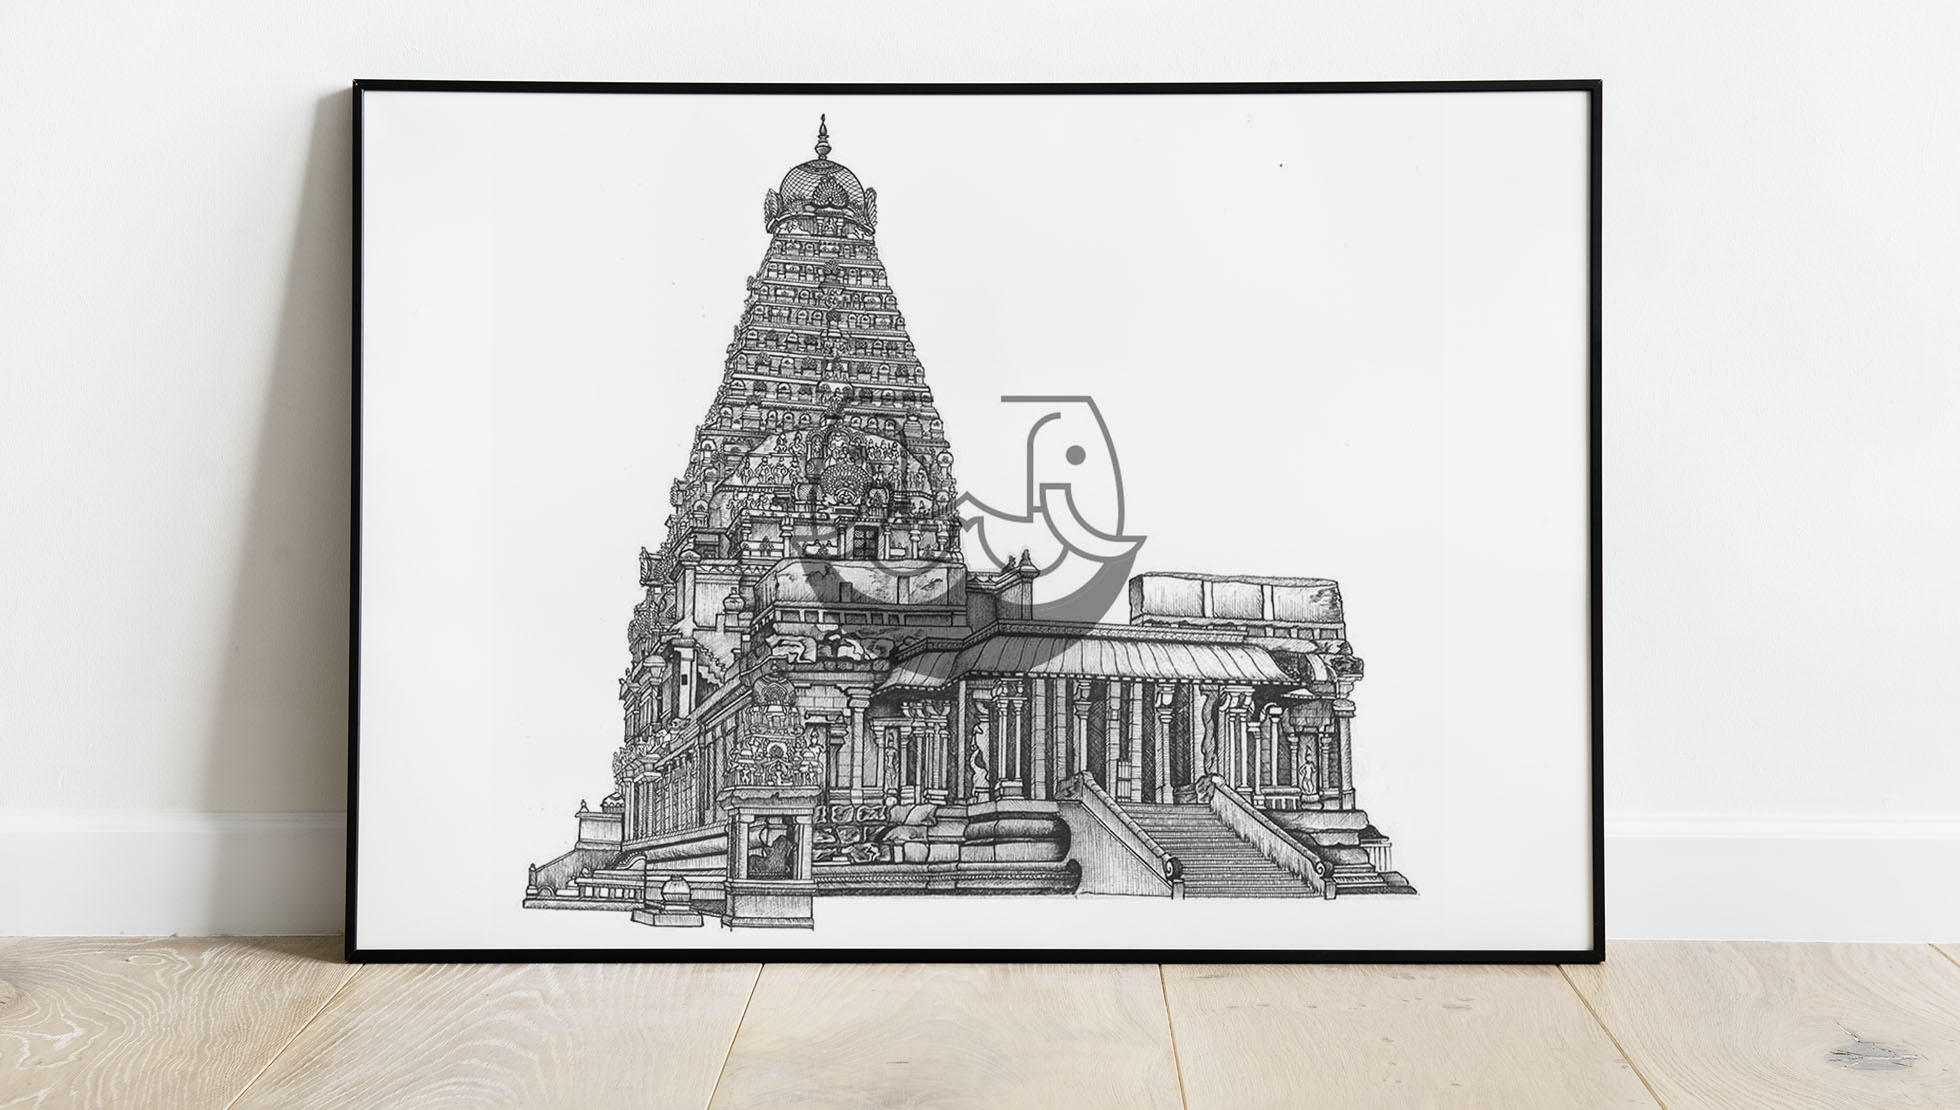 Hindu Temple at Thanjavur, India For sale as Framed Prints, Photos, Wall  Art and Photo Gifts